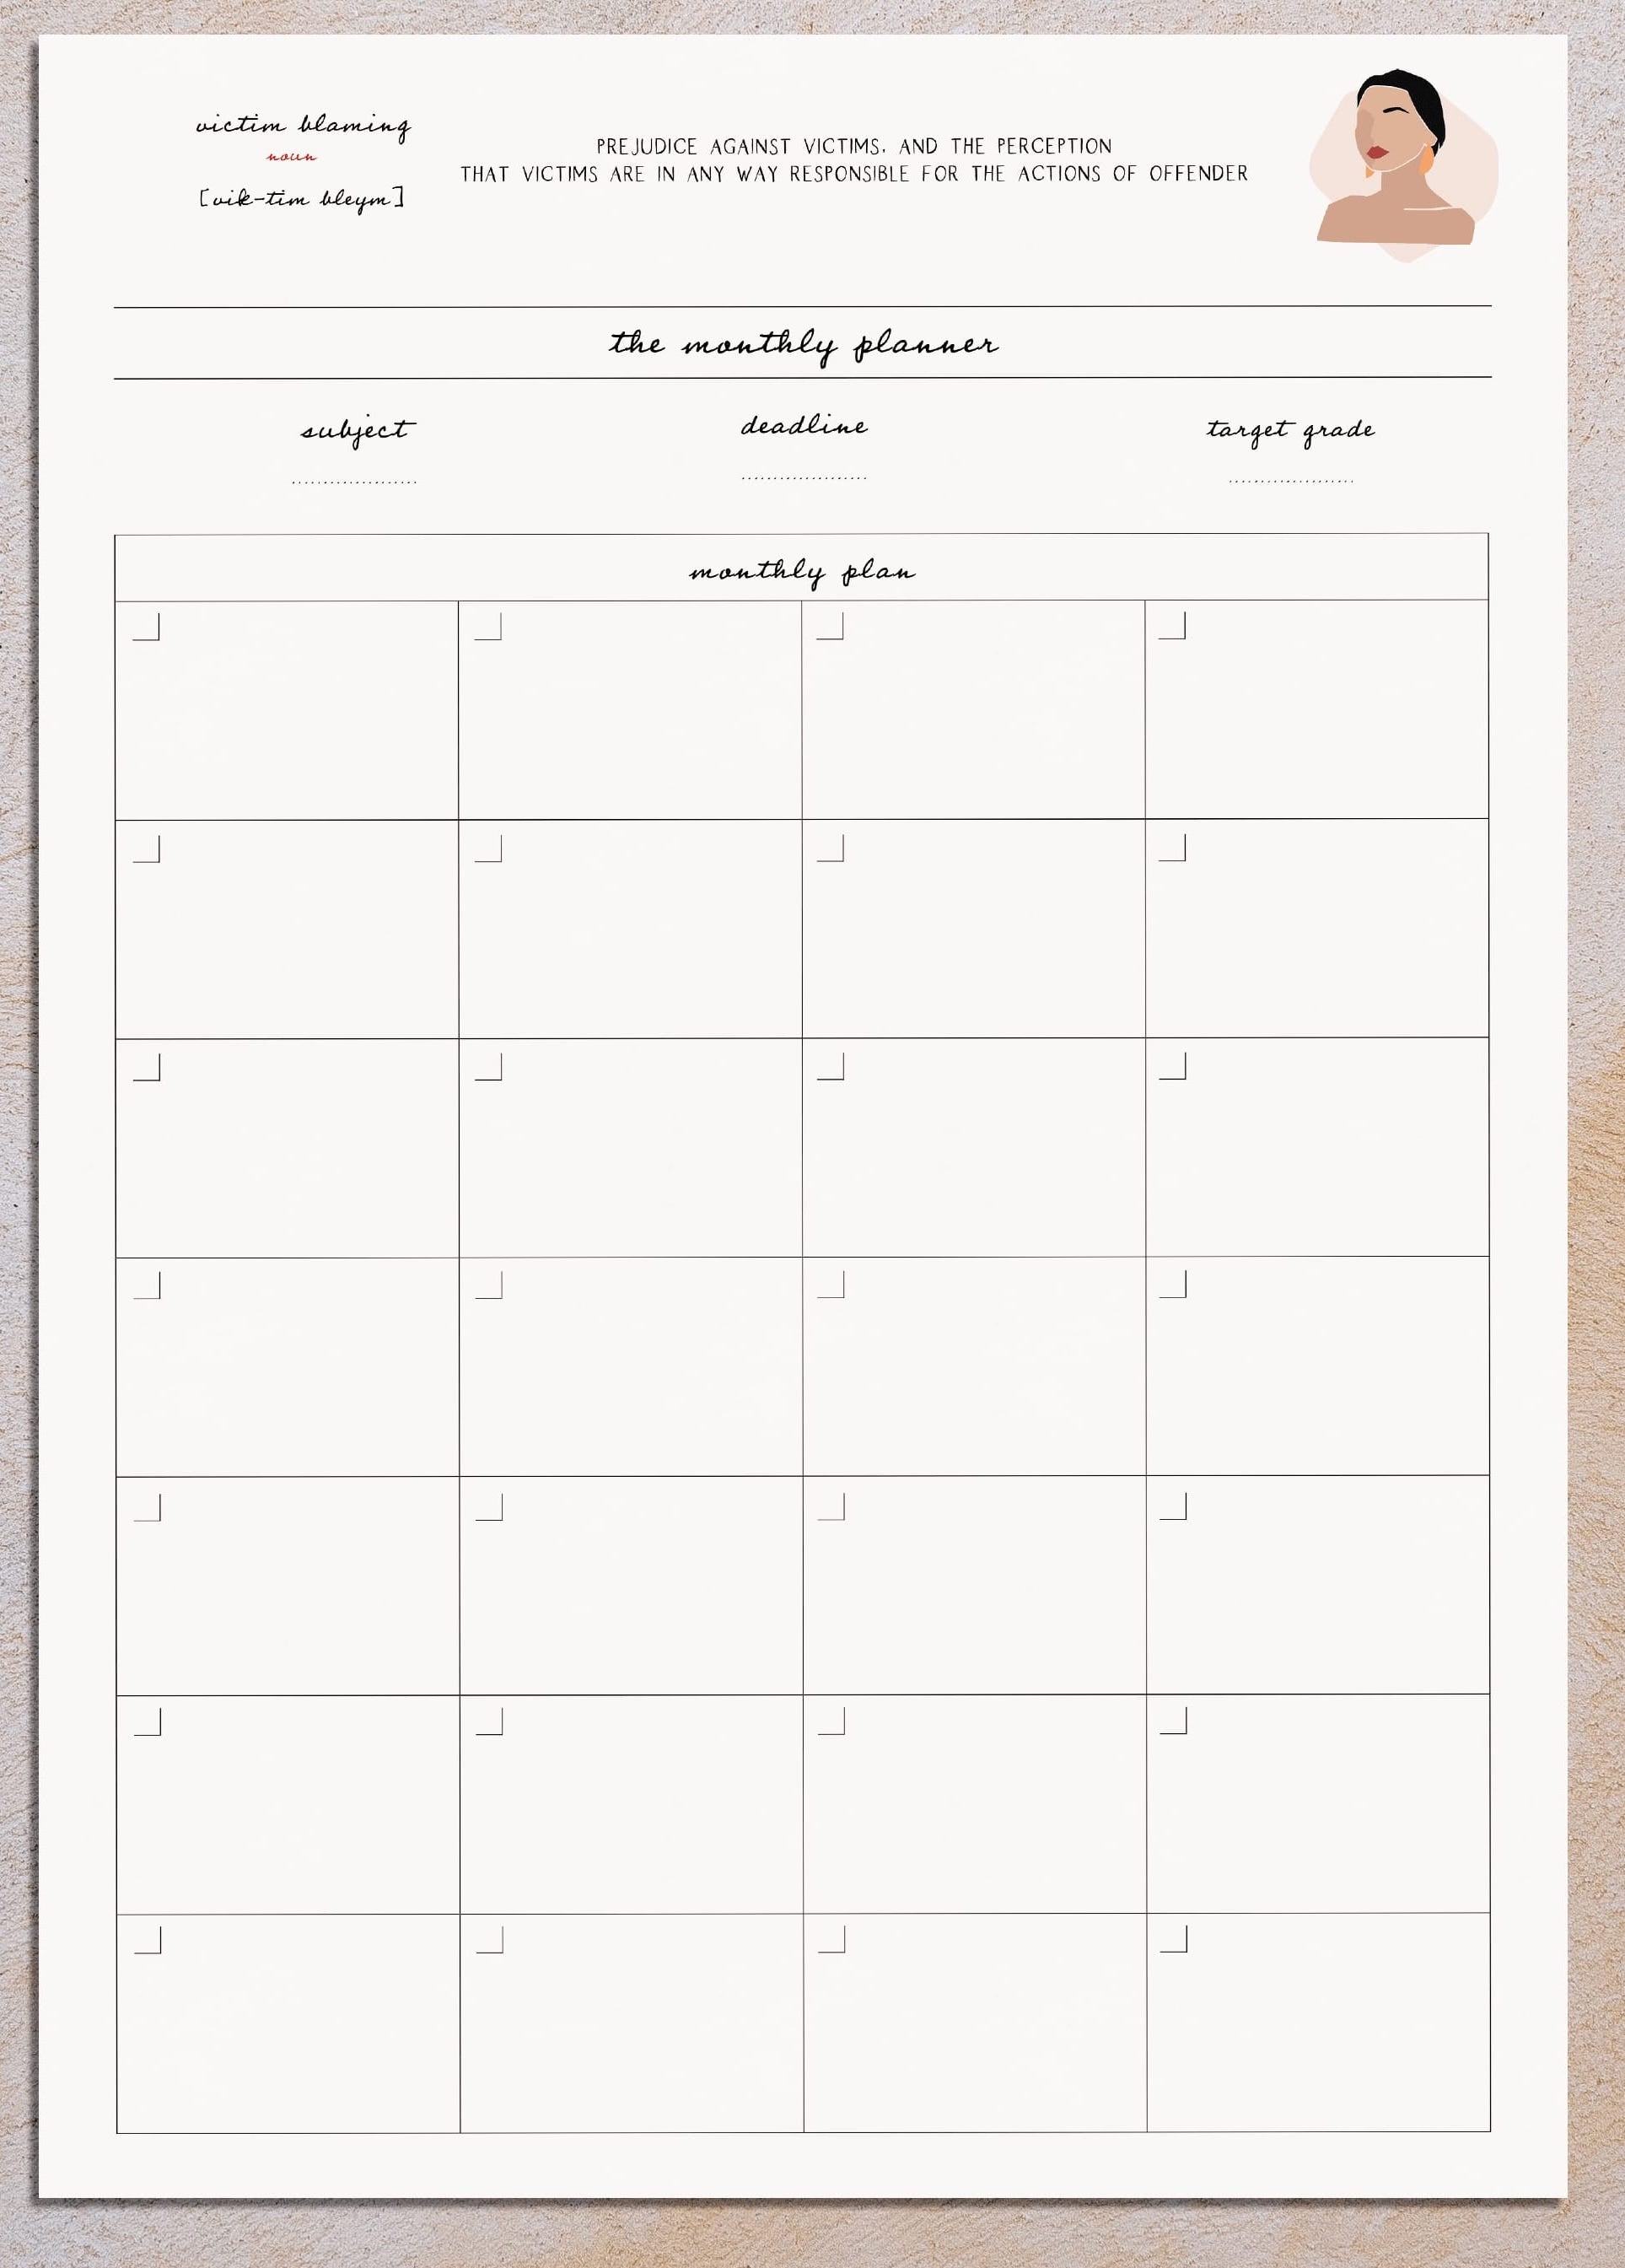 Student | Monthly Planner